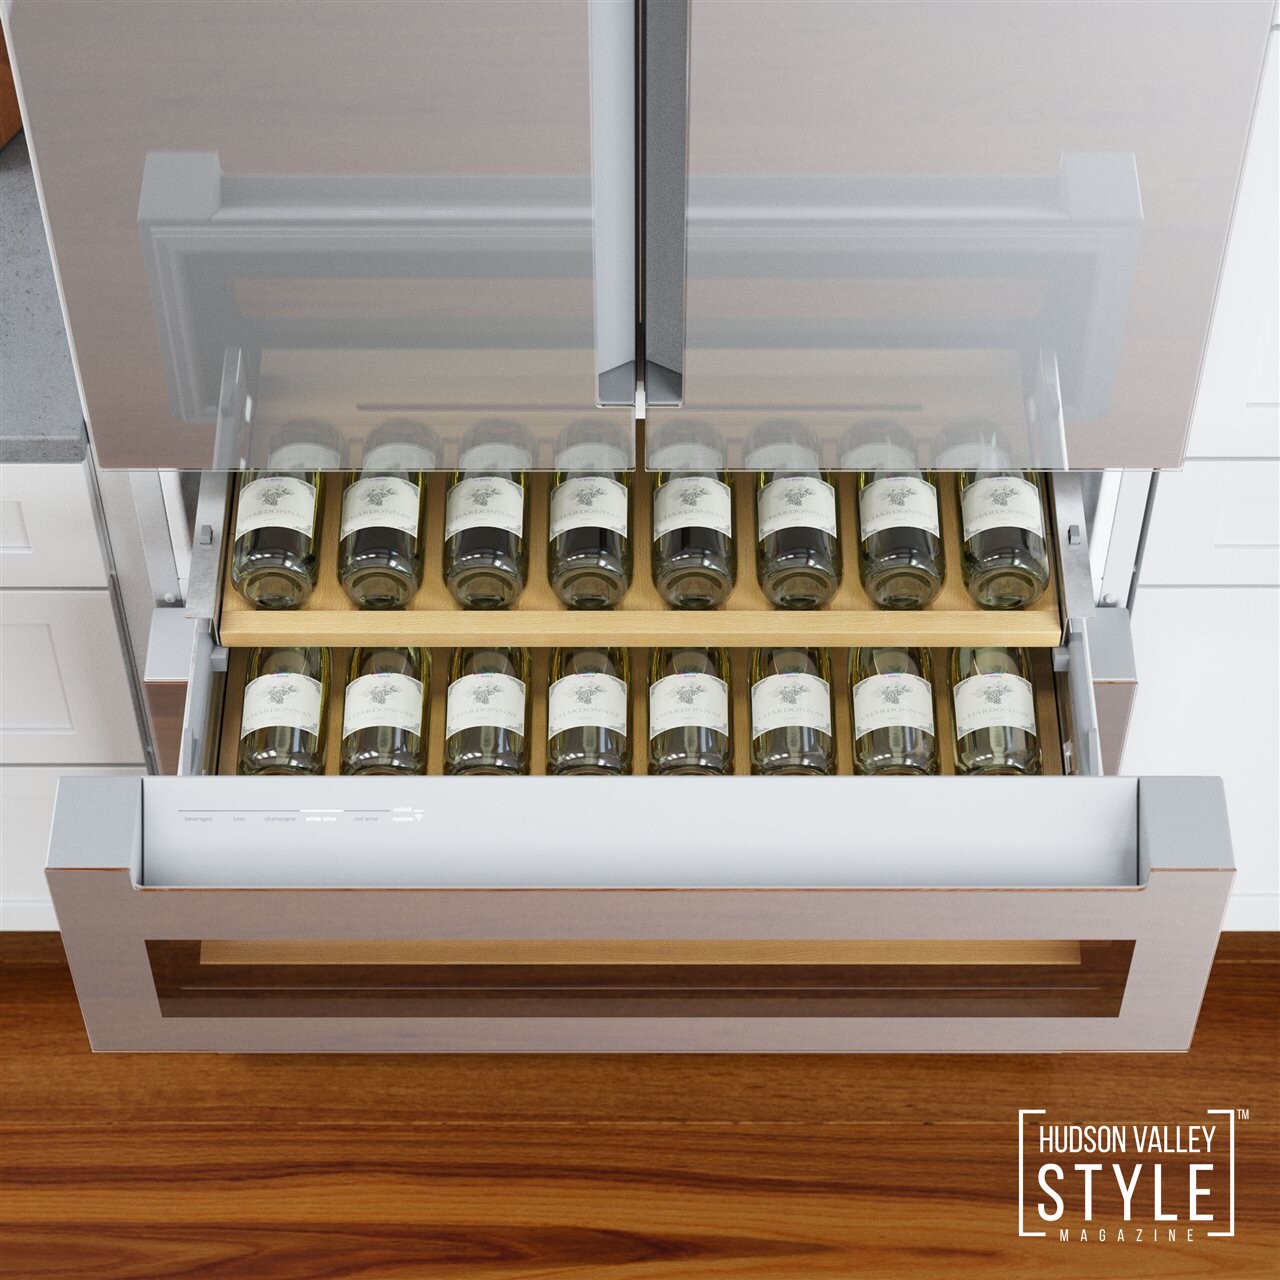 6 refrigeration trends that will make your life easier